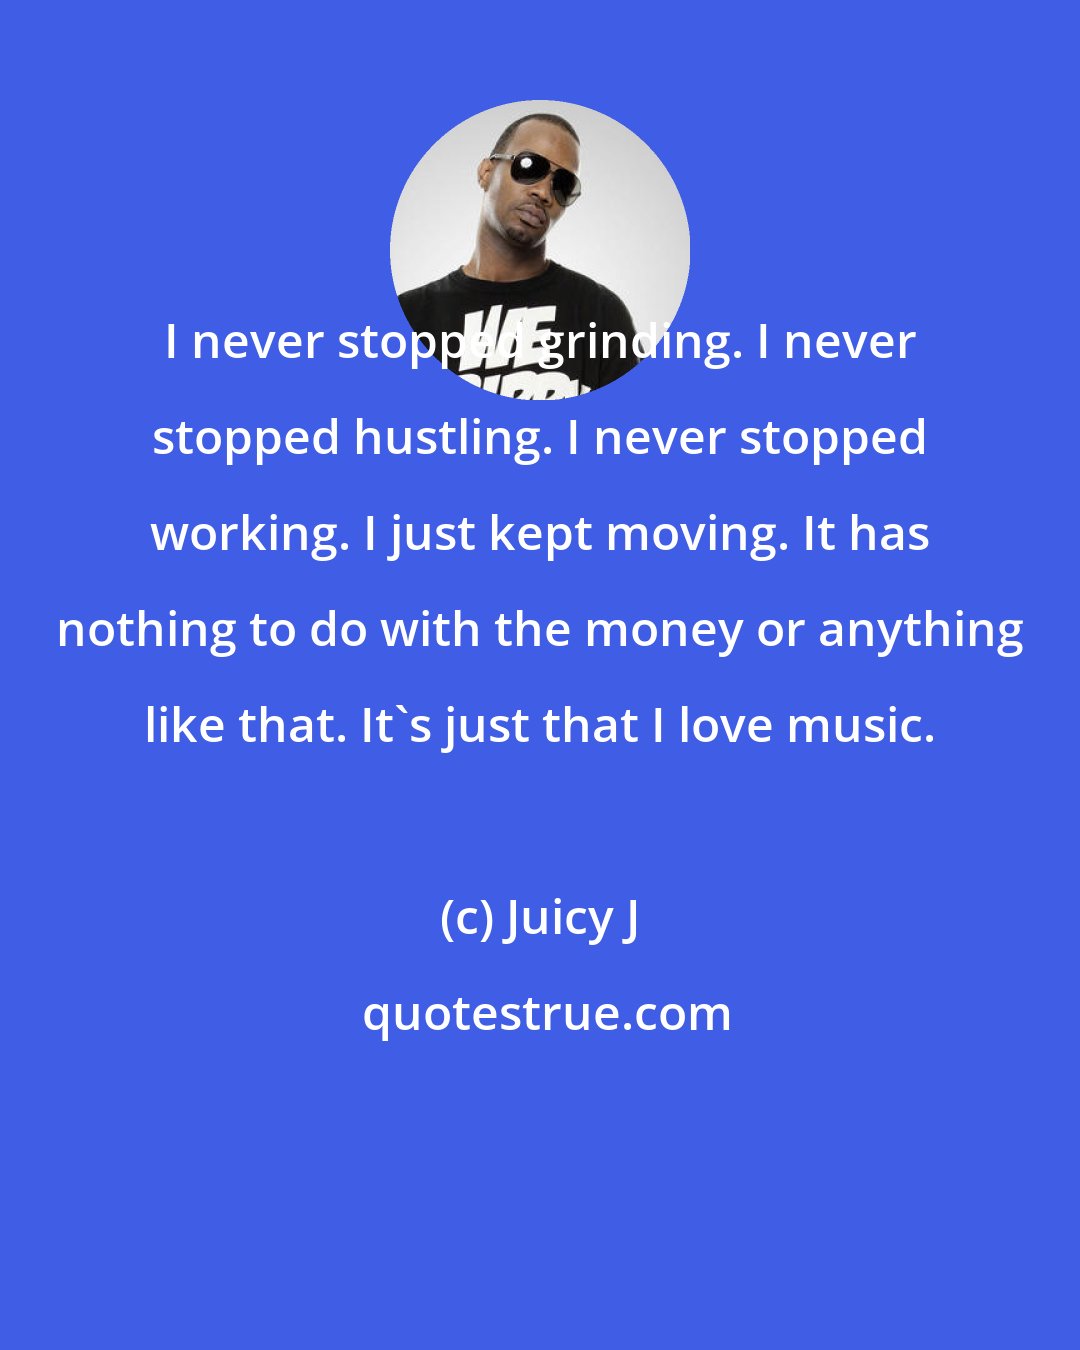 Juicy J: I never stopped grinding. I never stopped hustling. I never stopped working. I just kept moving. It has nothing to do with the money or anything like that. It's just that I love music.